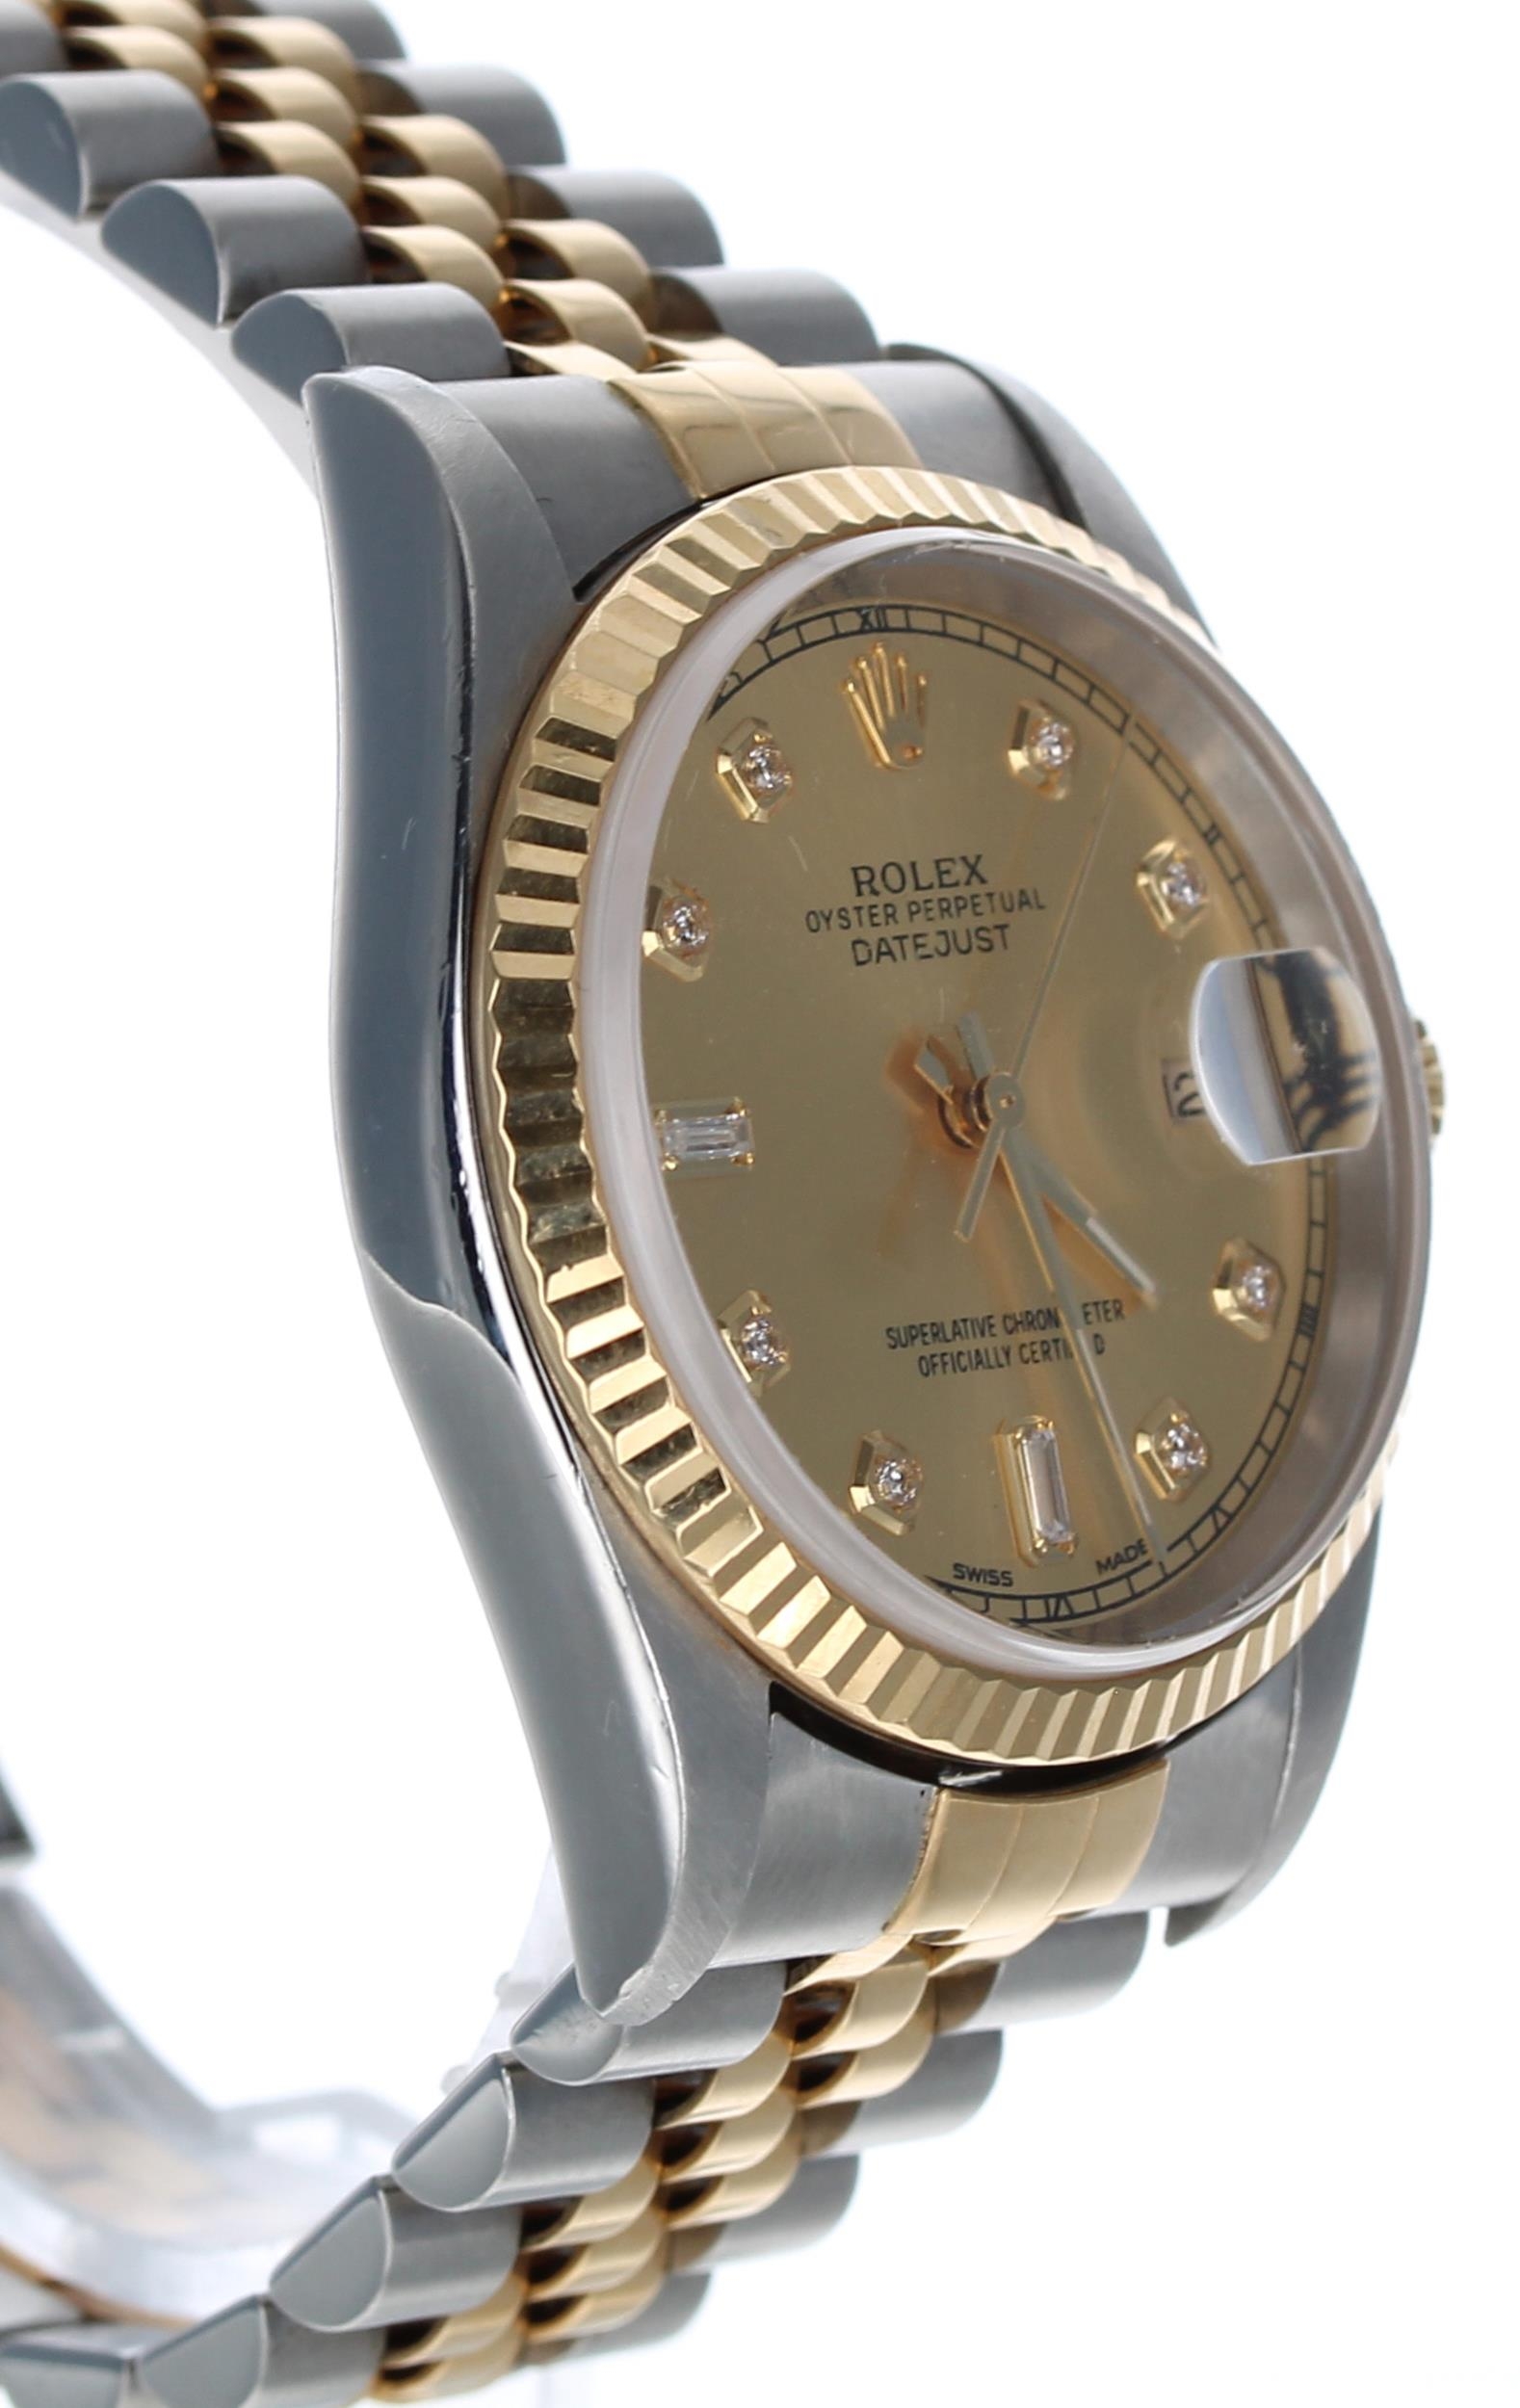 Rolex Oyster Perpetual Datejust stainless steel and gold gentleman's wristwatch, reference no. - Image 3 of 5